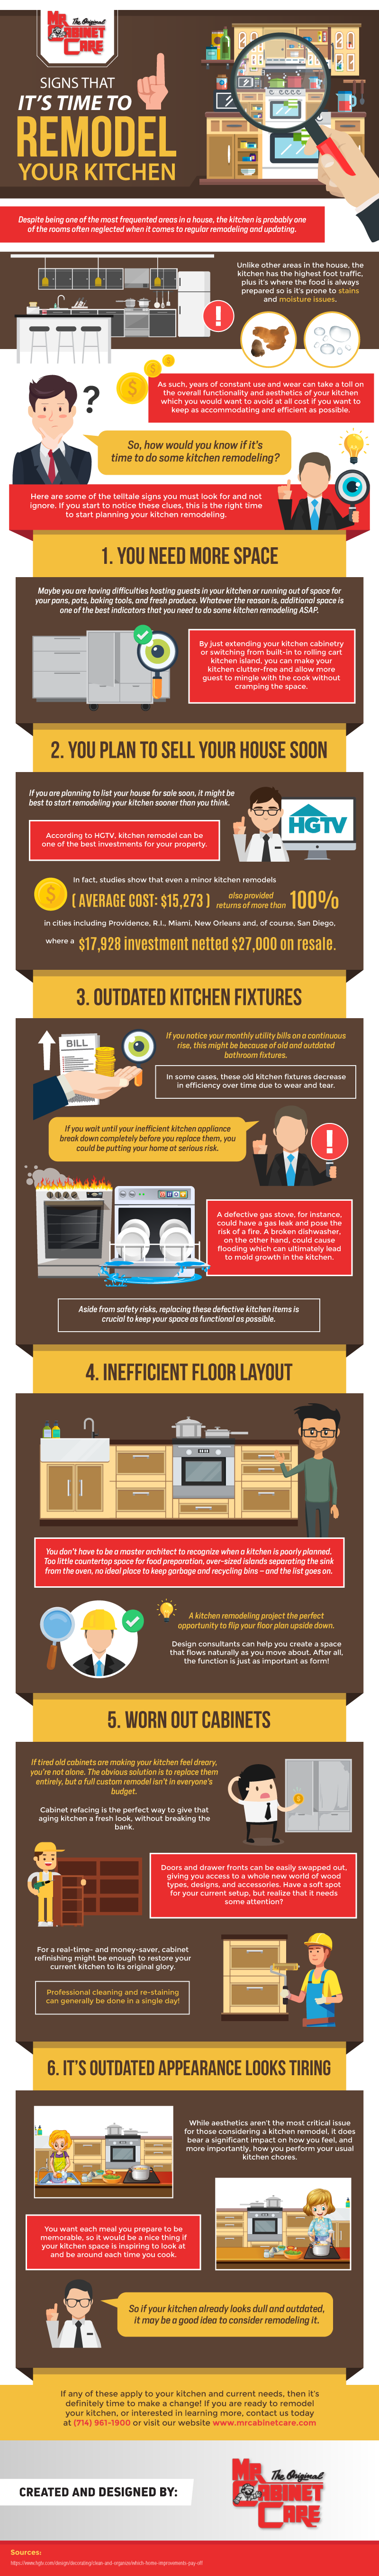 Signs That It’s Time to Remodel Your Kitchen - Infographic